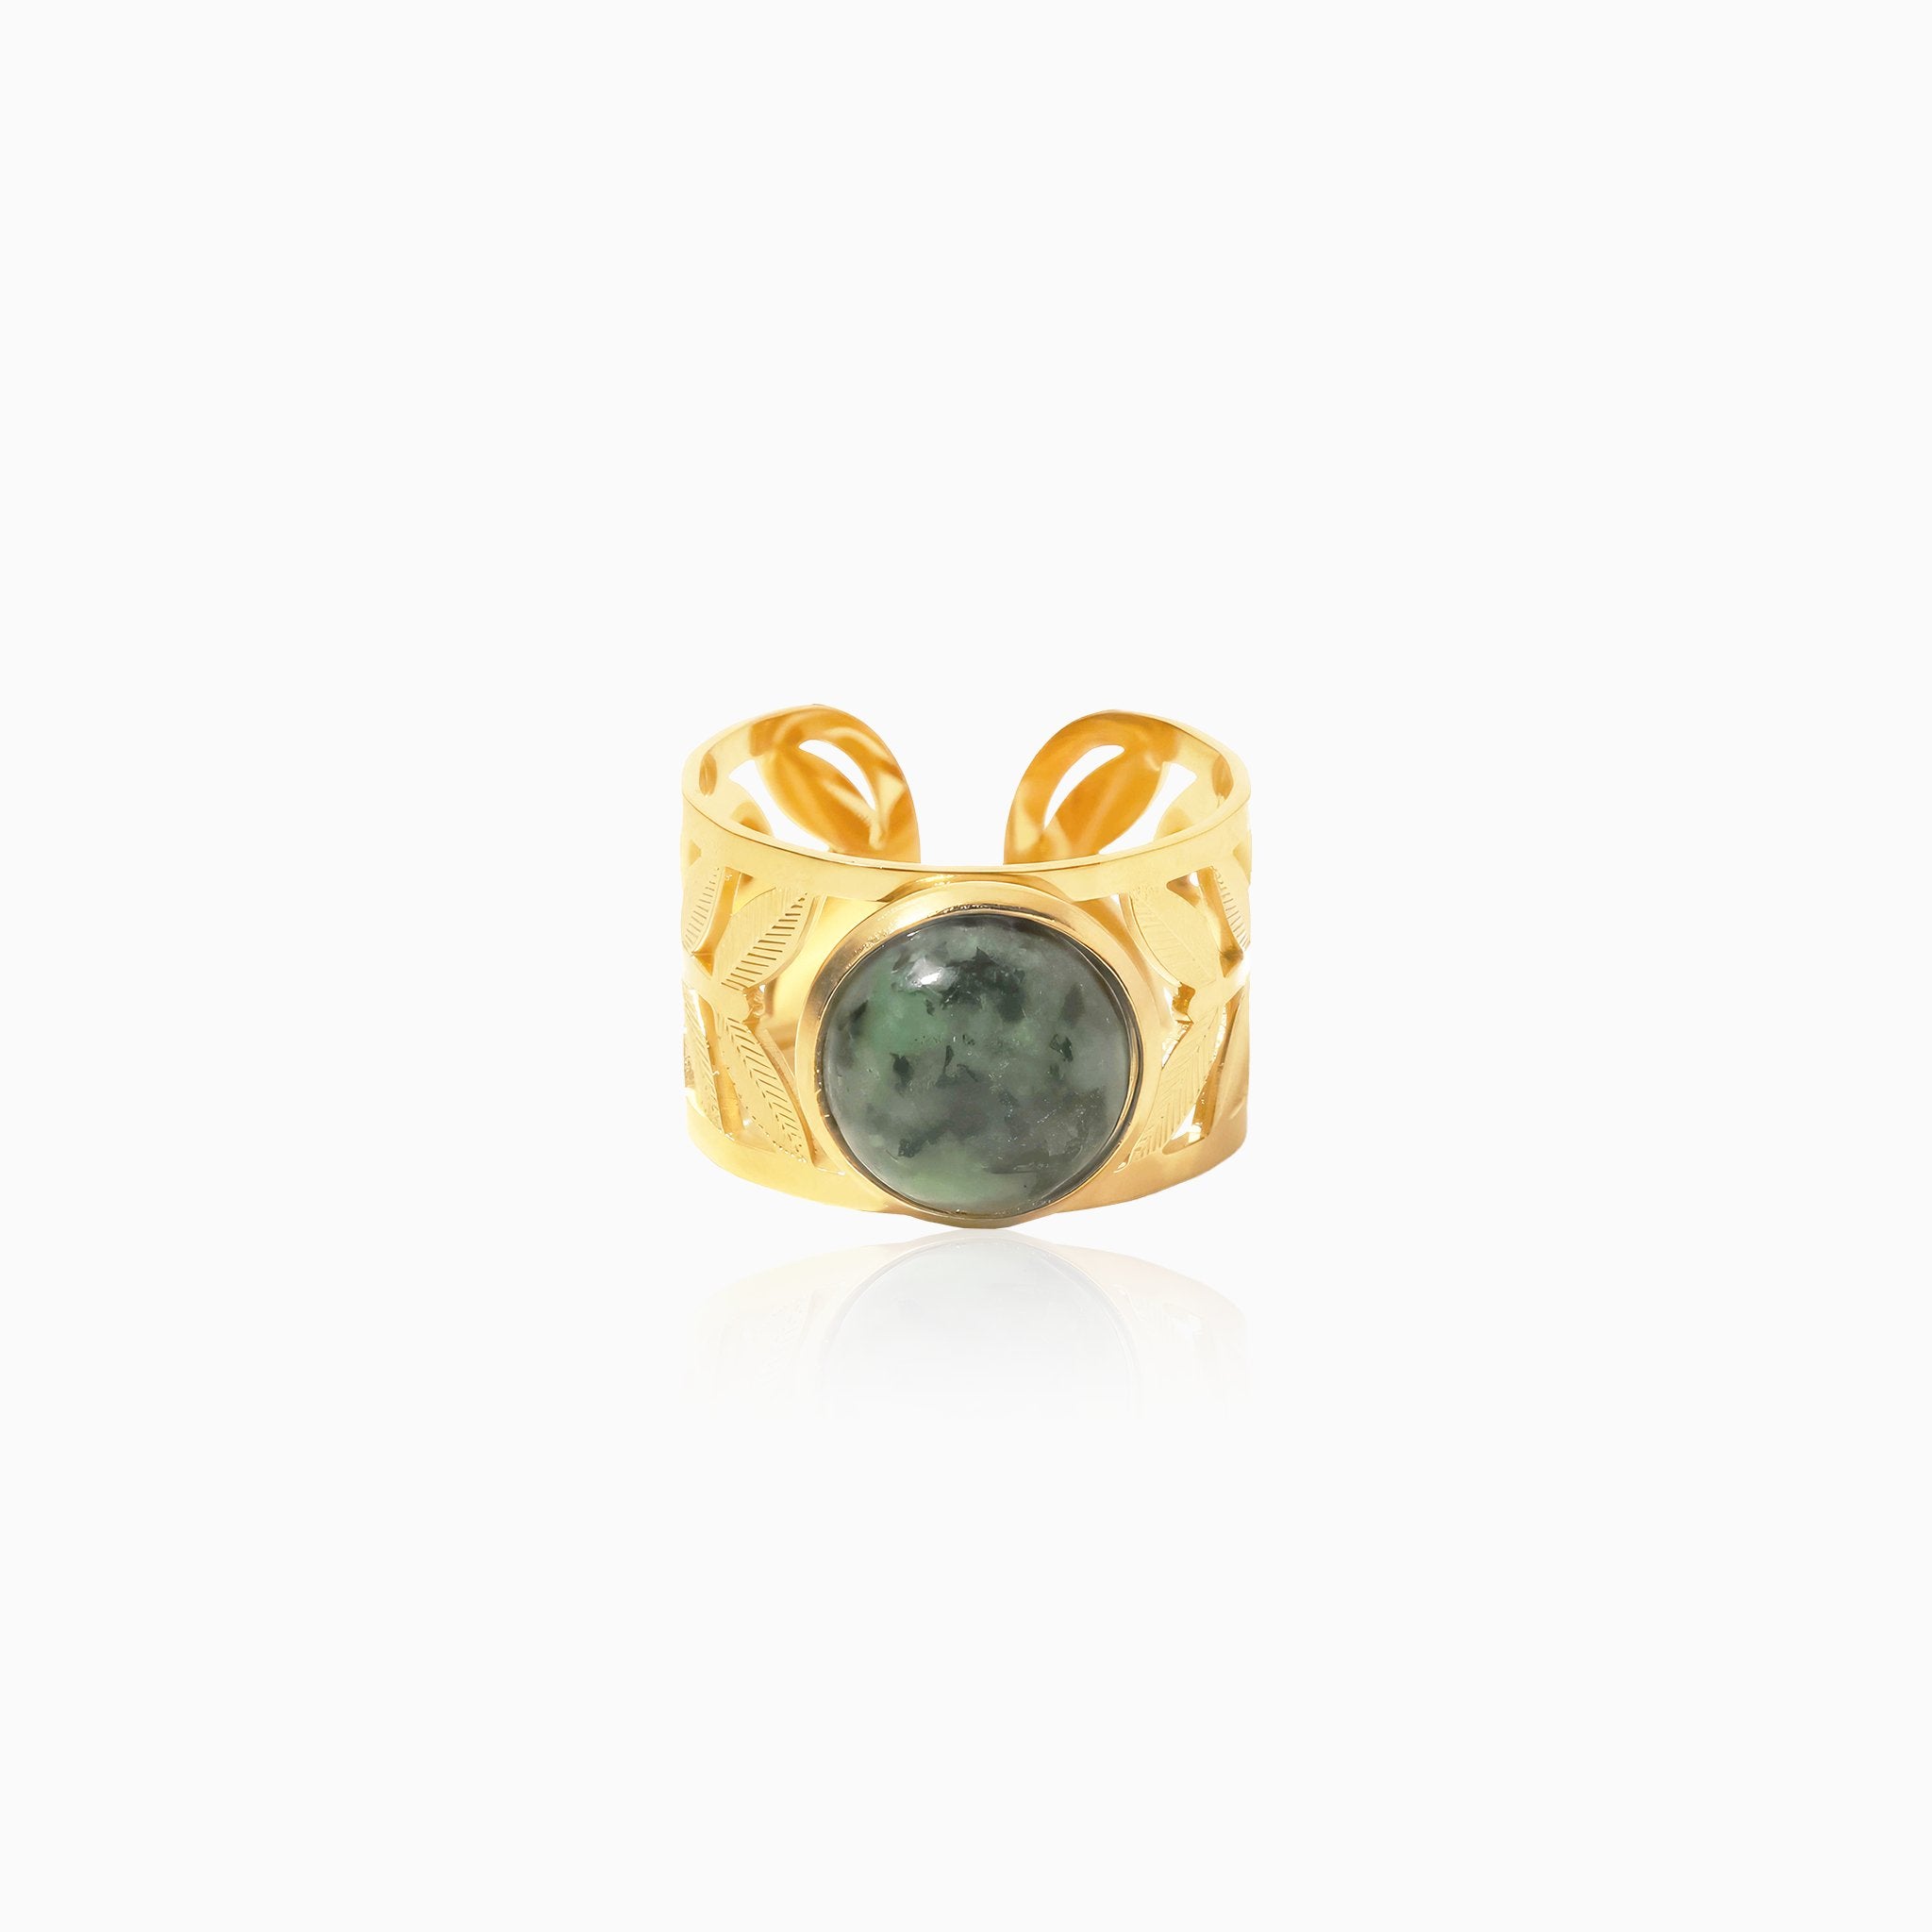 Green Malachite Leaf Ring - Nobbier - Ring - 18K Gold And Titanium PVD Coated Jewelry